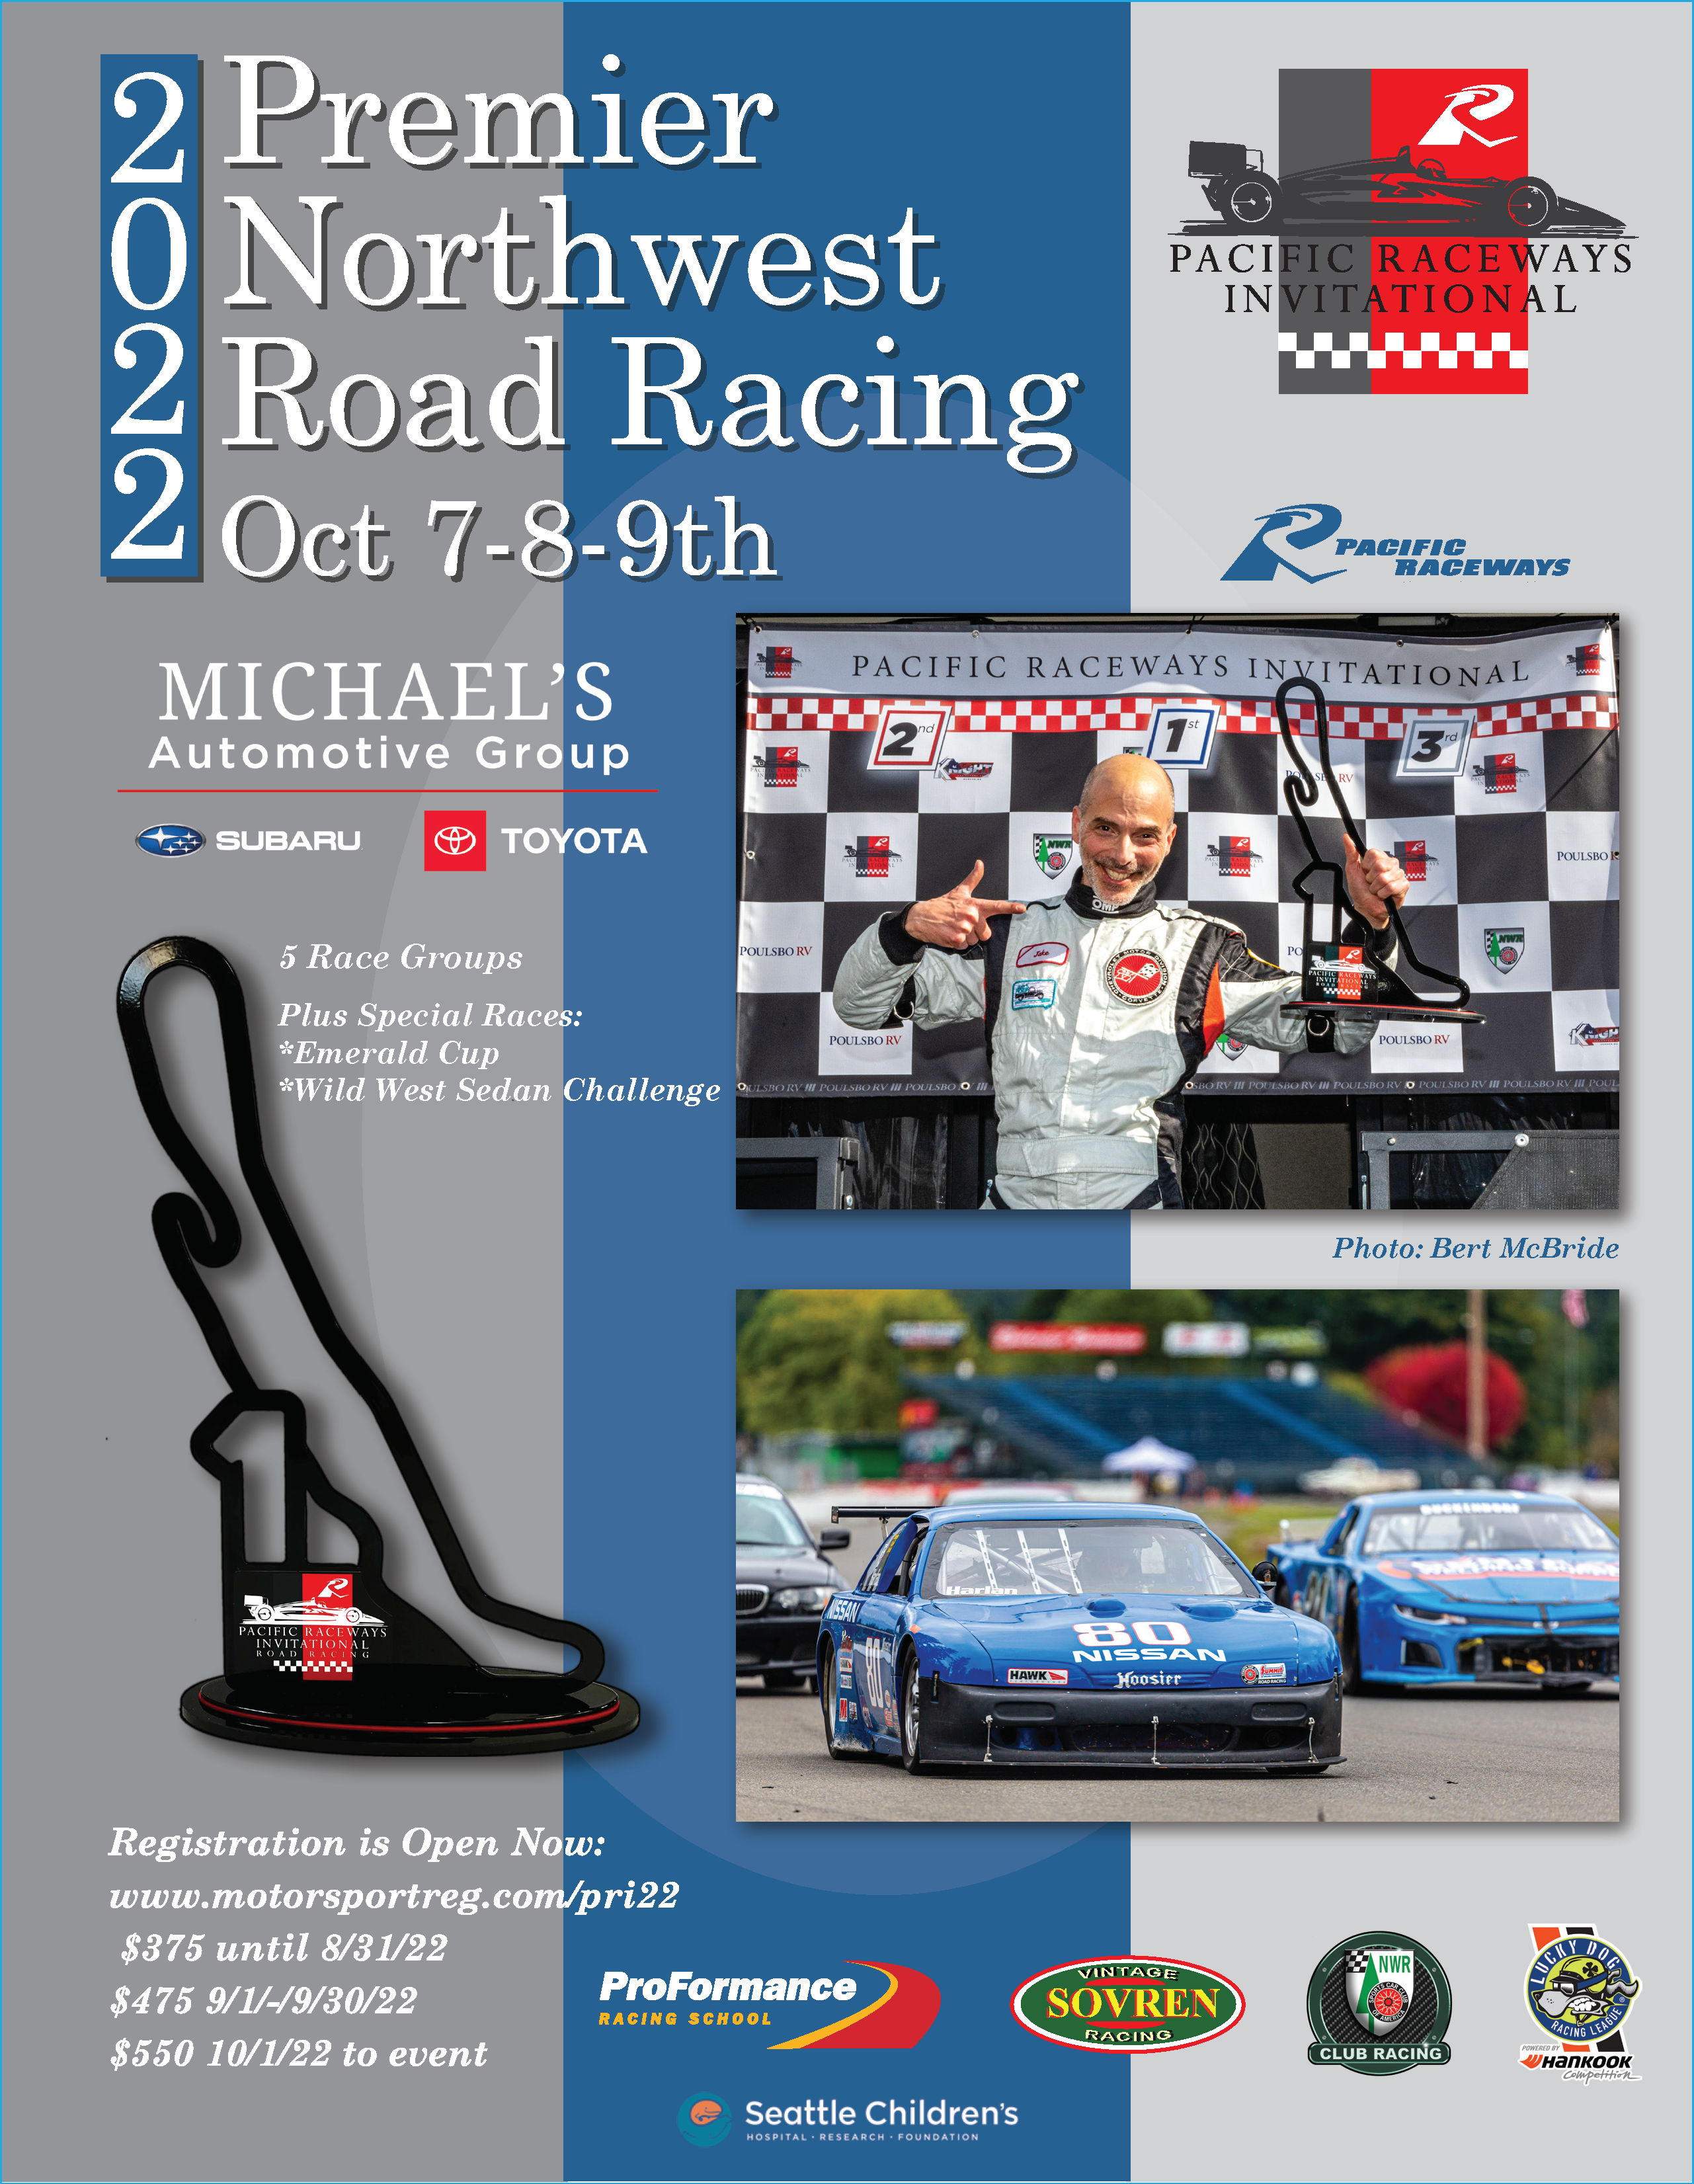 2022 Poster: Pacific Raceways Invitational October 7-8-9